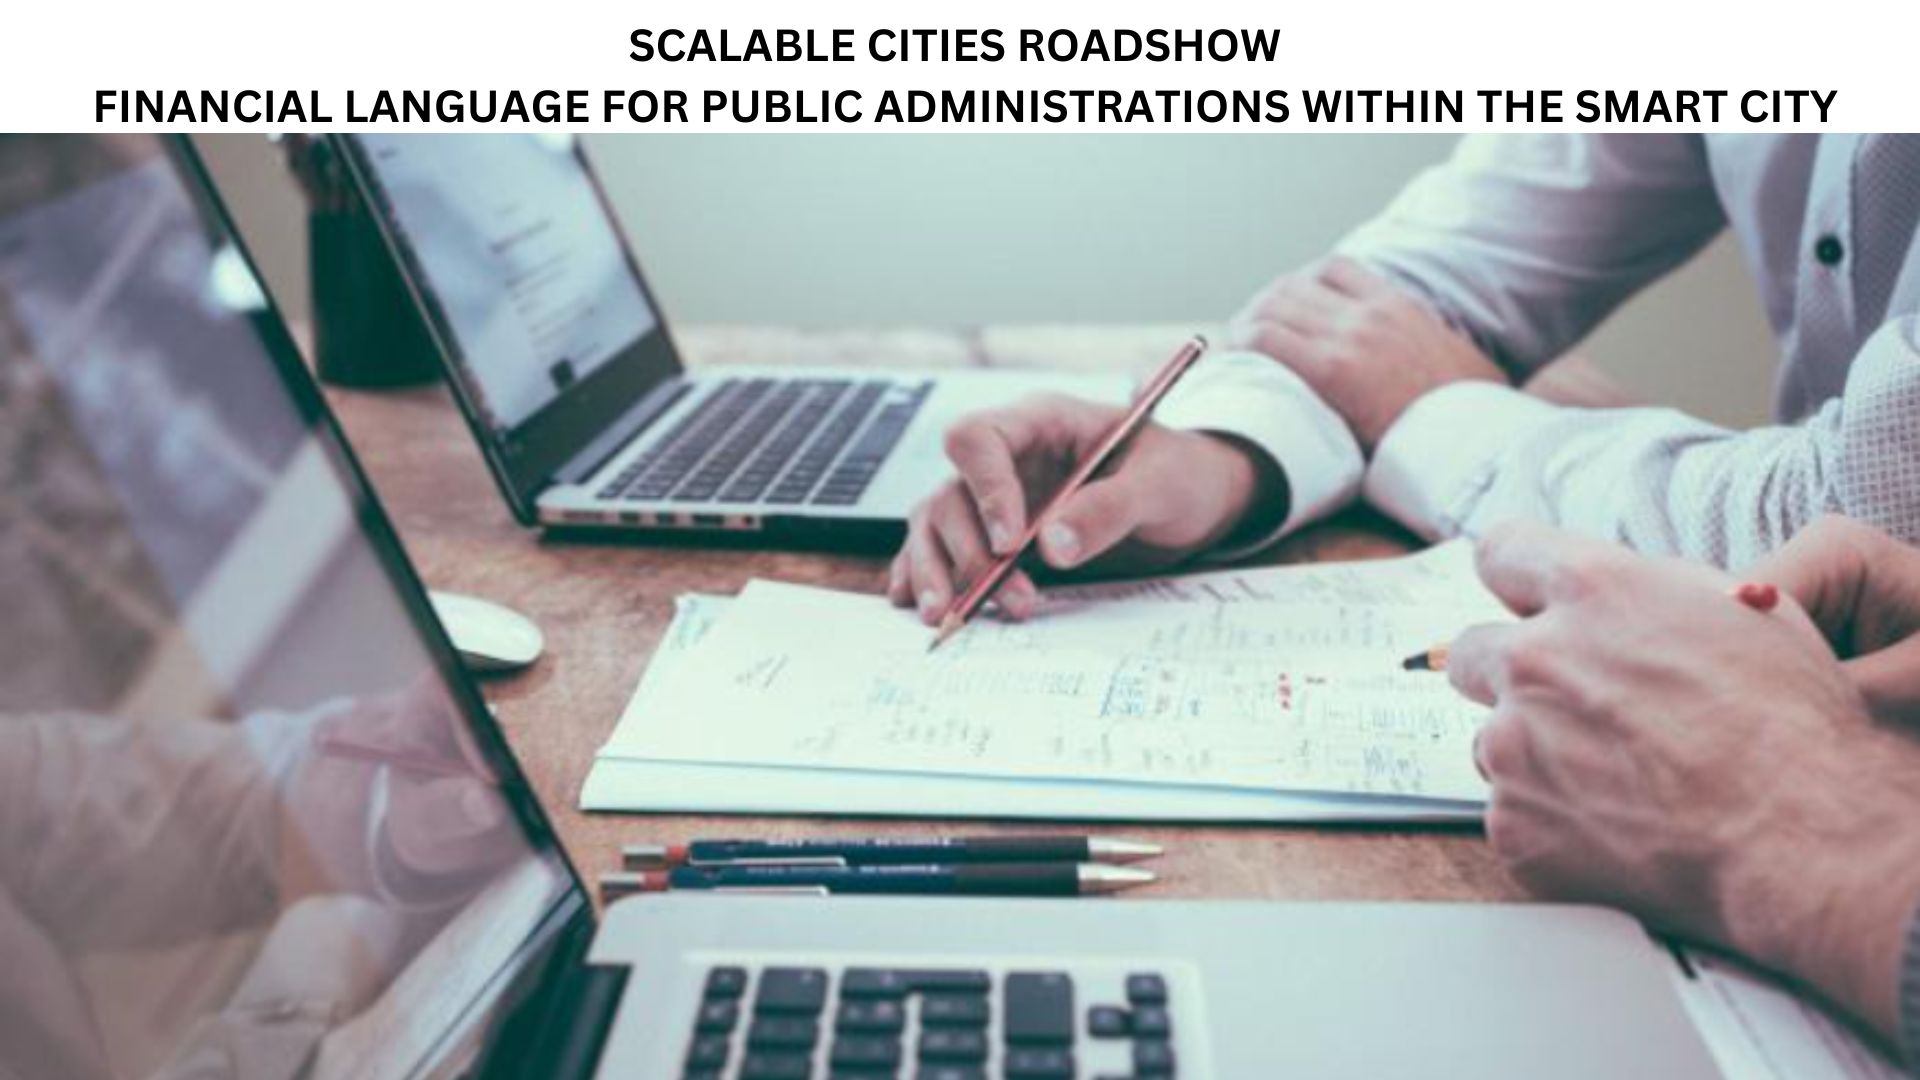 Scalable Cities Roadshow – Financial Language for Public Administrations within the Smart City